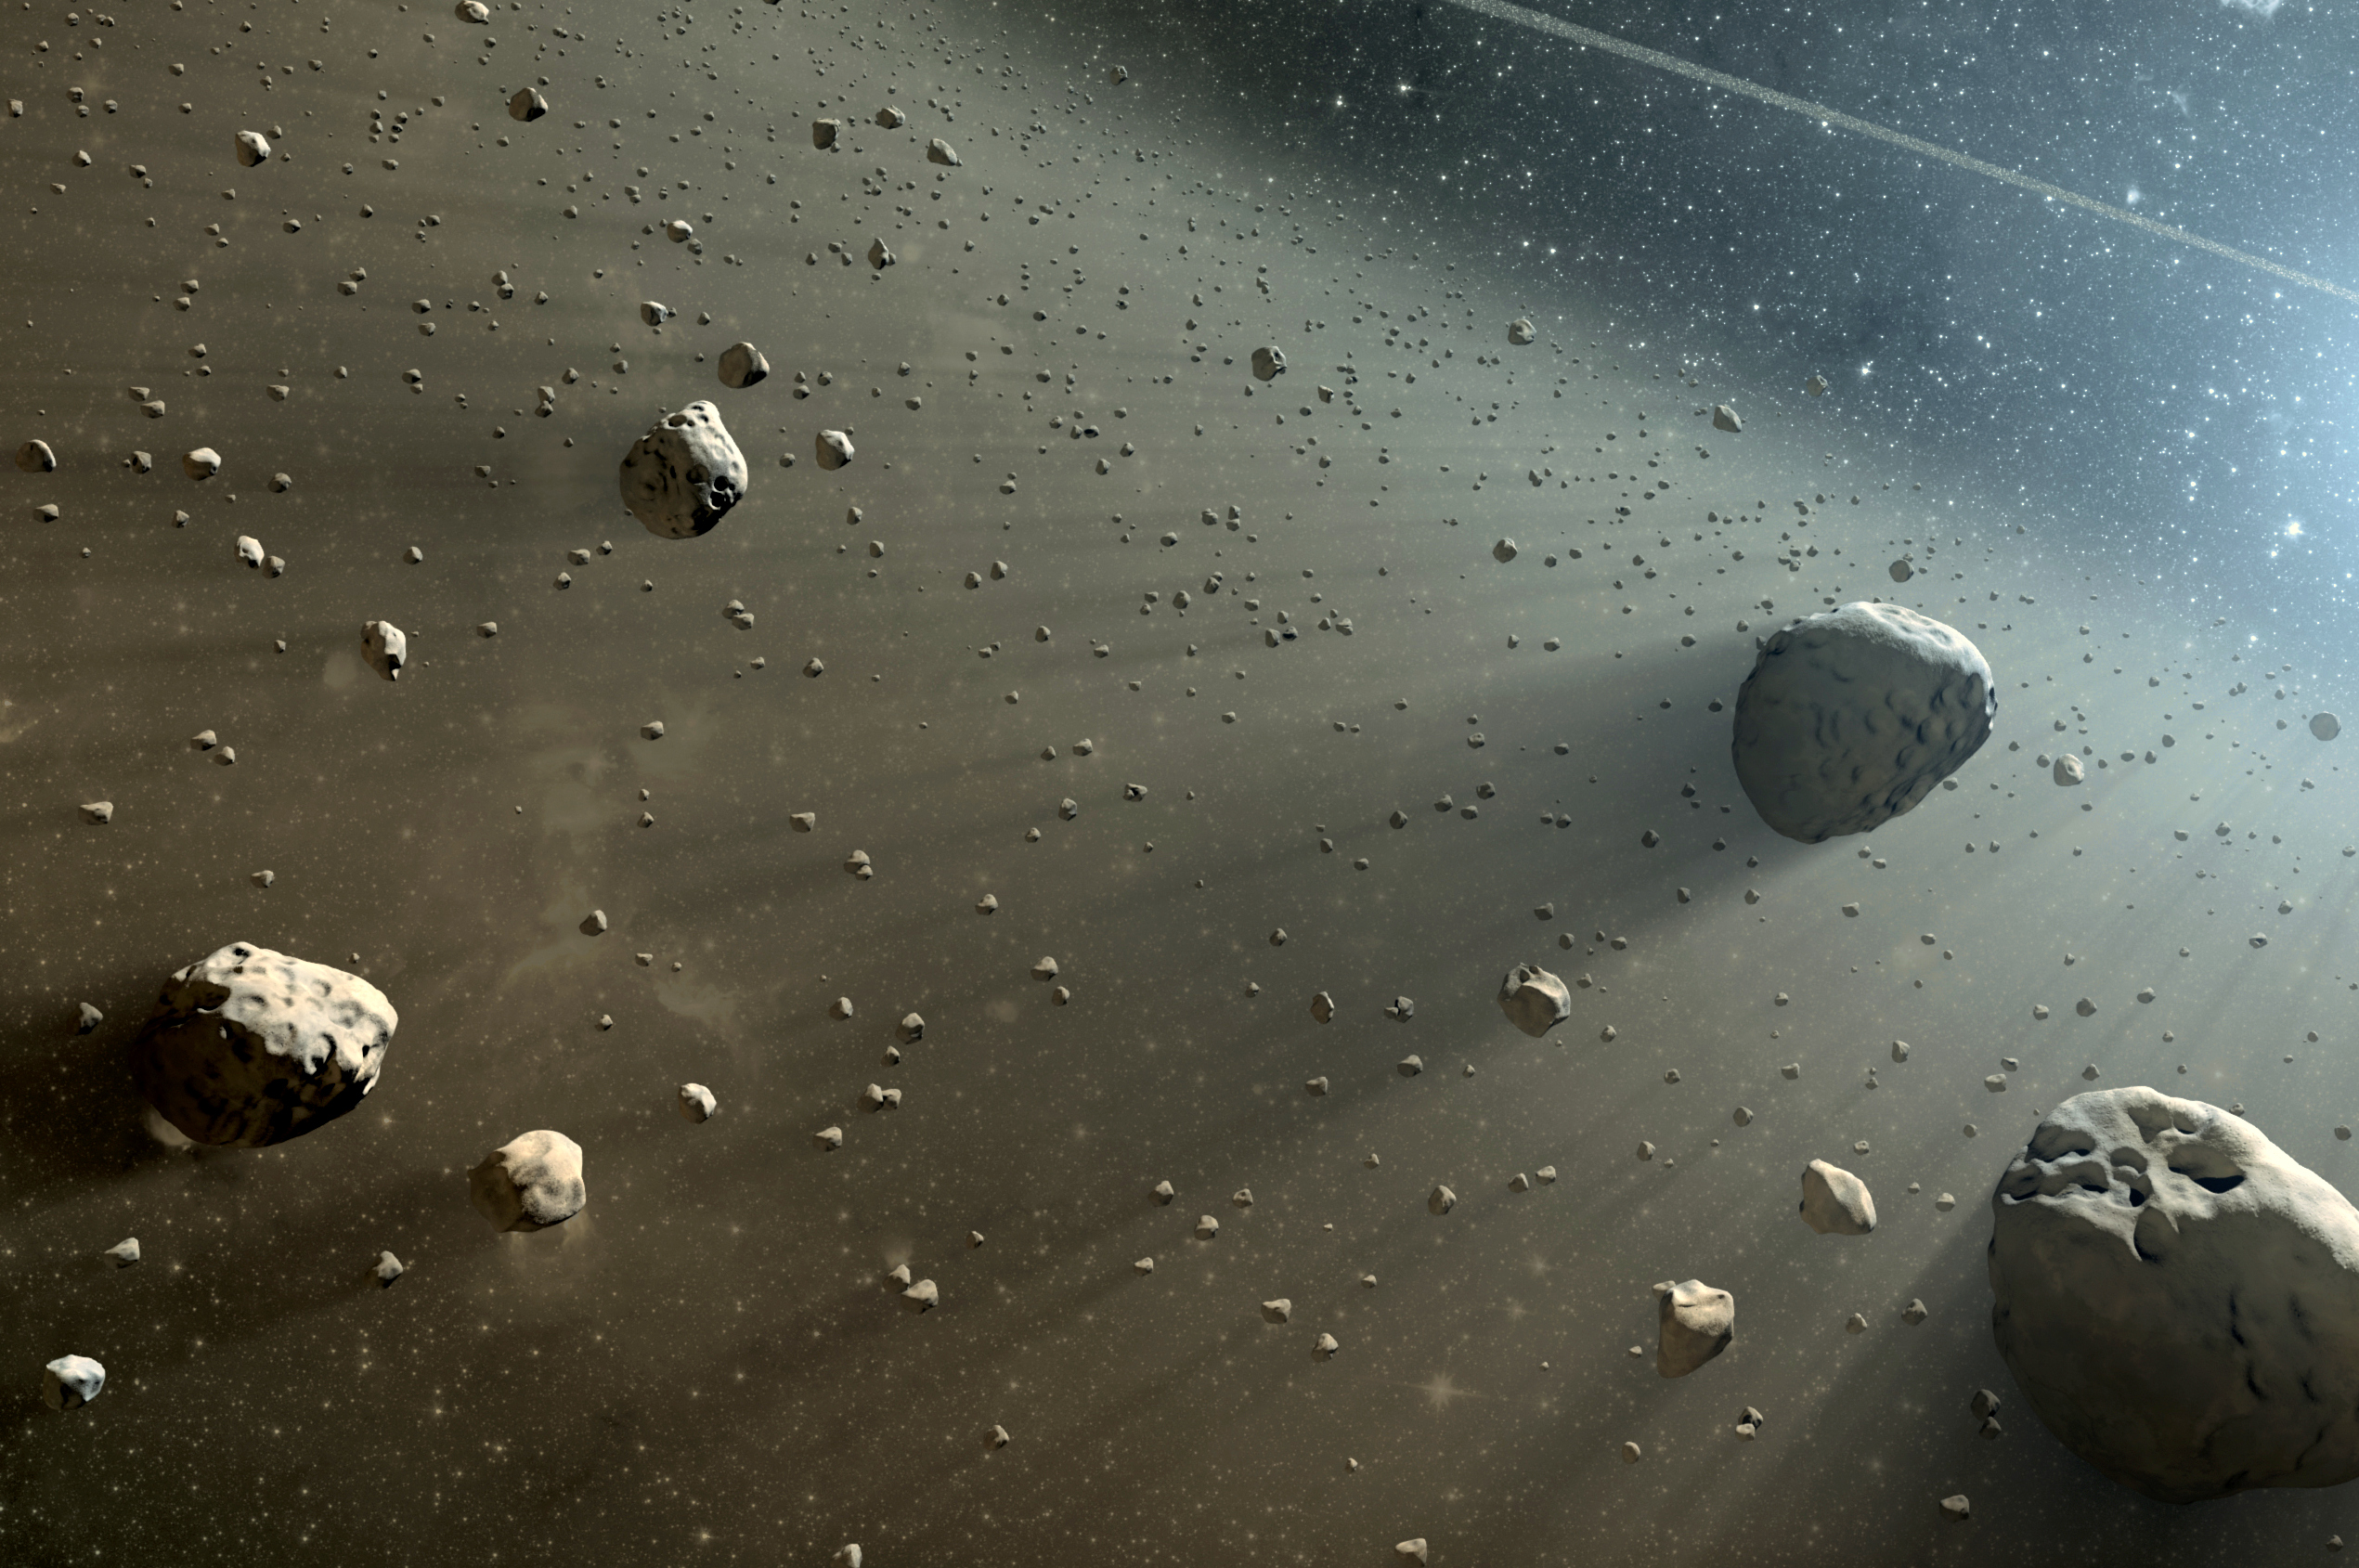 Illustration - Artist's rendering of asteroids and space dust. (Credit: NASA/JPL-Caltech)